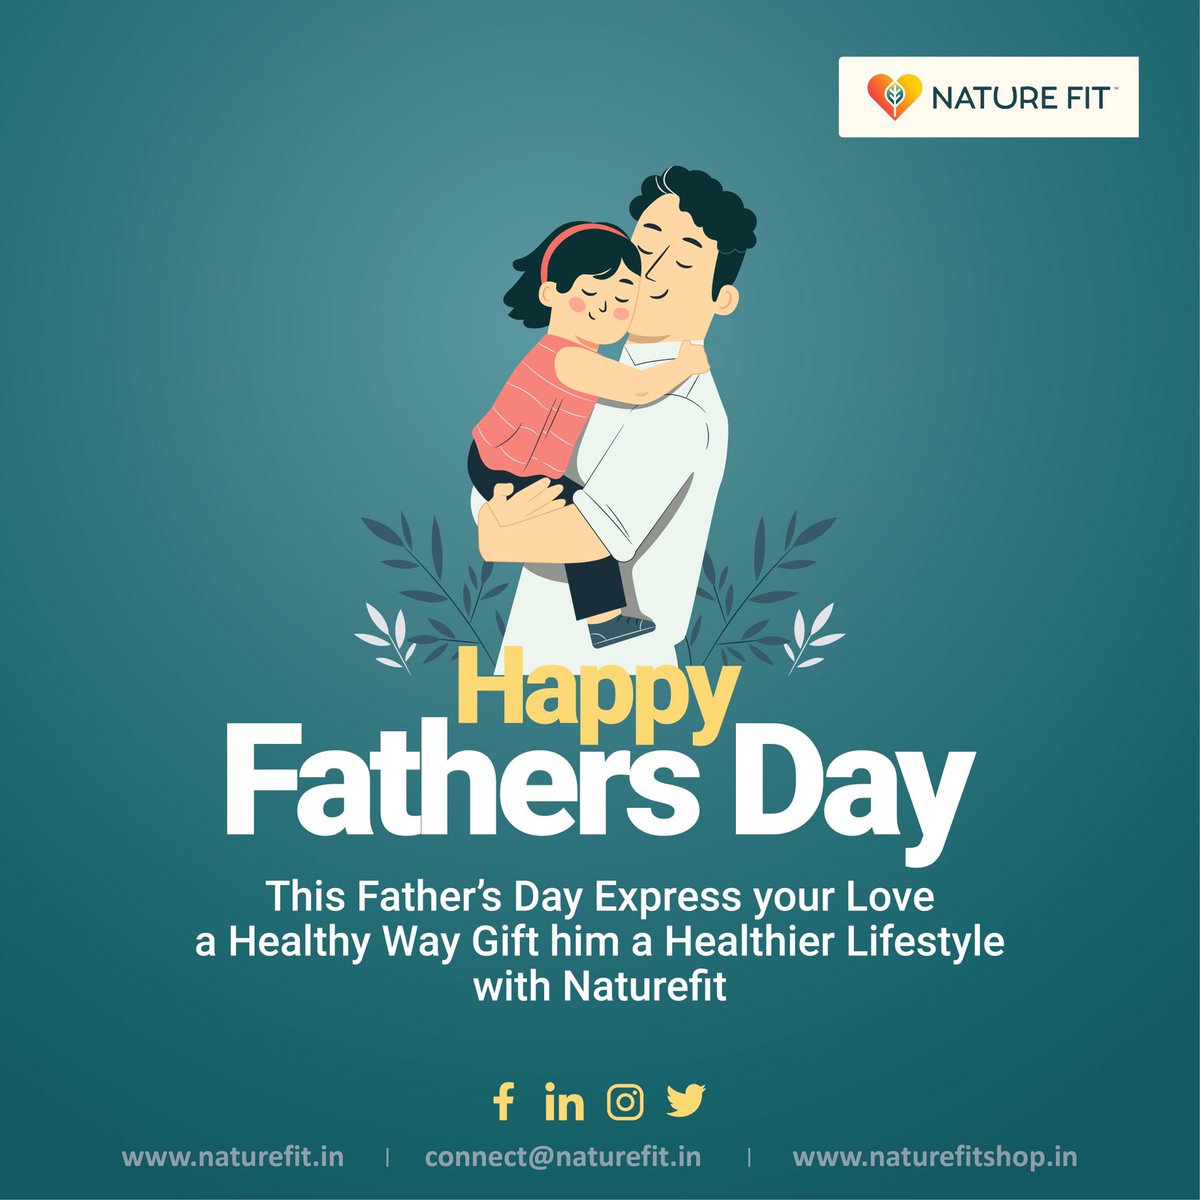 Any man can be a Father but it takes a special person to be DAD ❤️

#fatherhood #FatherDay #HappyFarthersDay #happyfathersday2023 #FatherDay #father #dad #healthyfood #healthylife #heal #Healing #fathersdaygift #fathersdaygiftideas #healthcare #HealthForAll